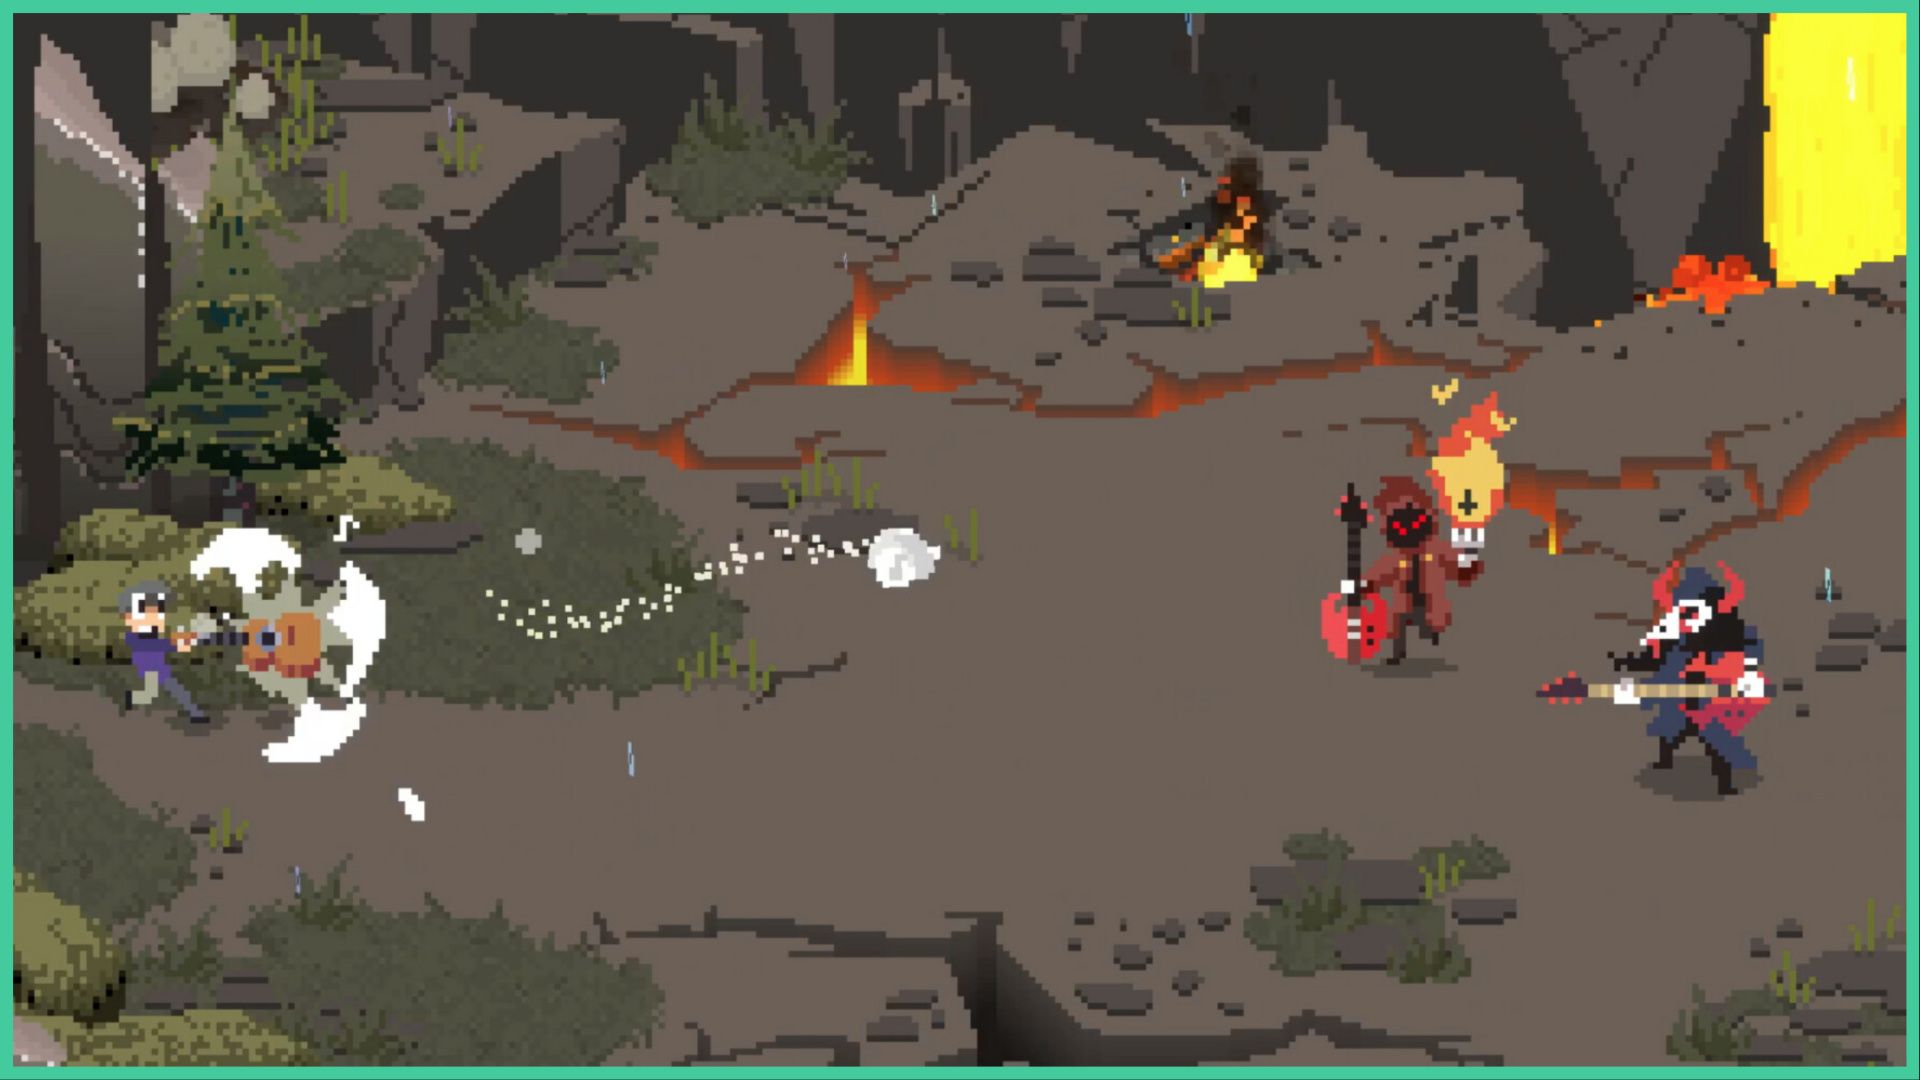 feature image for our fretless news, the image features a promo screenshot from the game of the main character wielding his guitar in battle as he shoots an attack out towards the enemies who are also wielding guitars. One enemies is also wielding a large flame in their other hand as they are surrounded by rock and lava